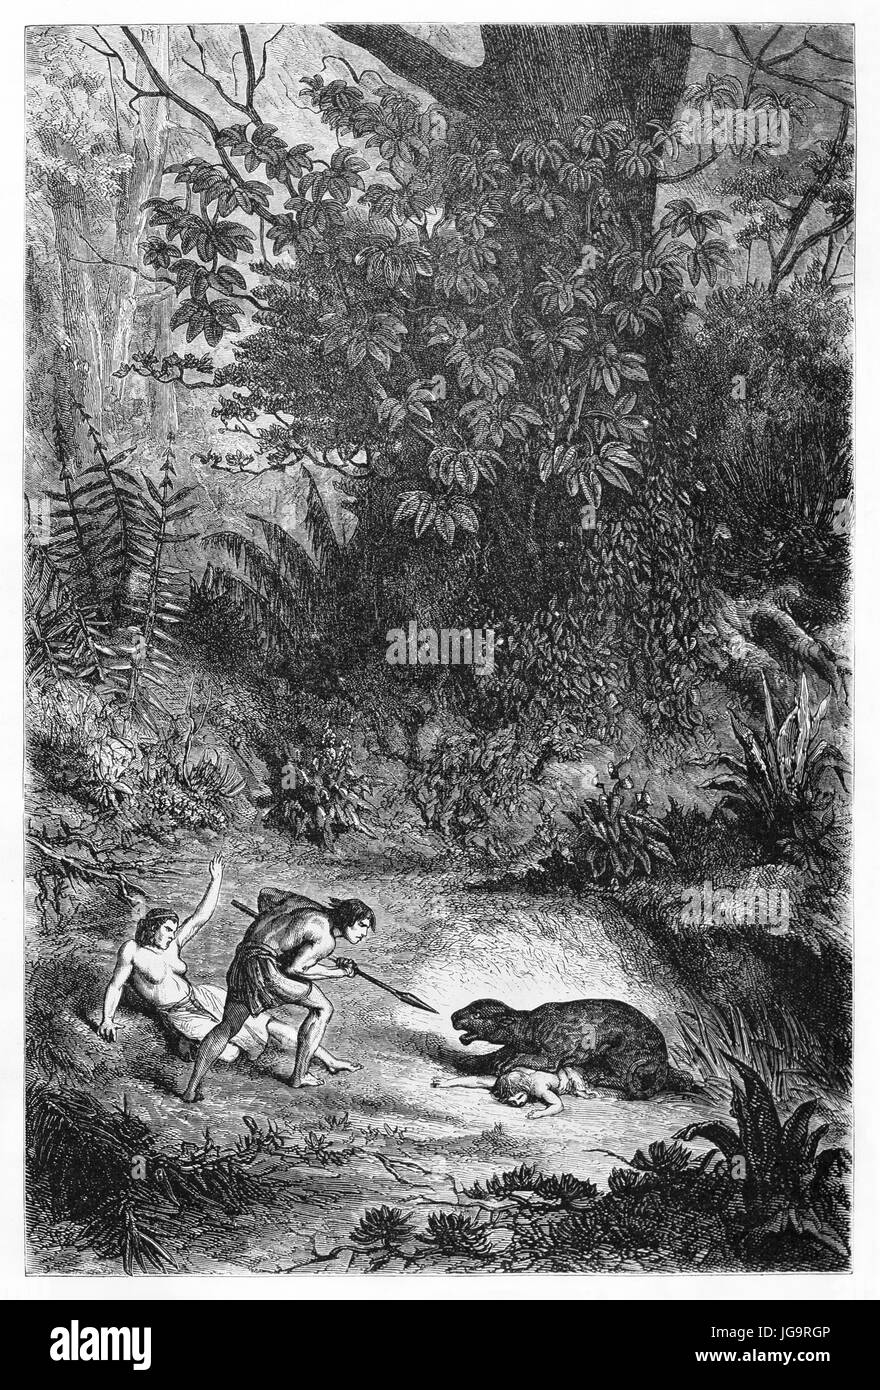 Old illustration depicting Jaguar attack to indigenous family in the jungle, South America. Created by Castelli, published on Le Tour du Monde, Paris, Stock Photo